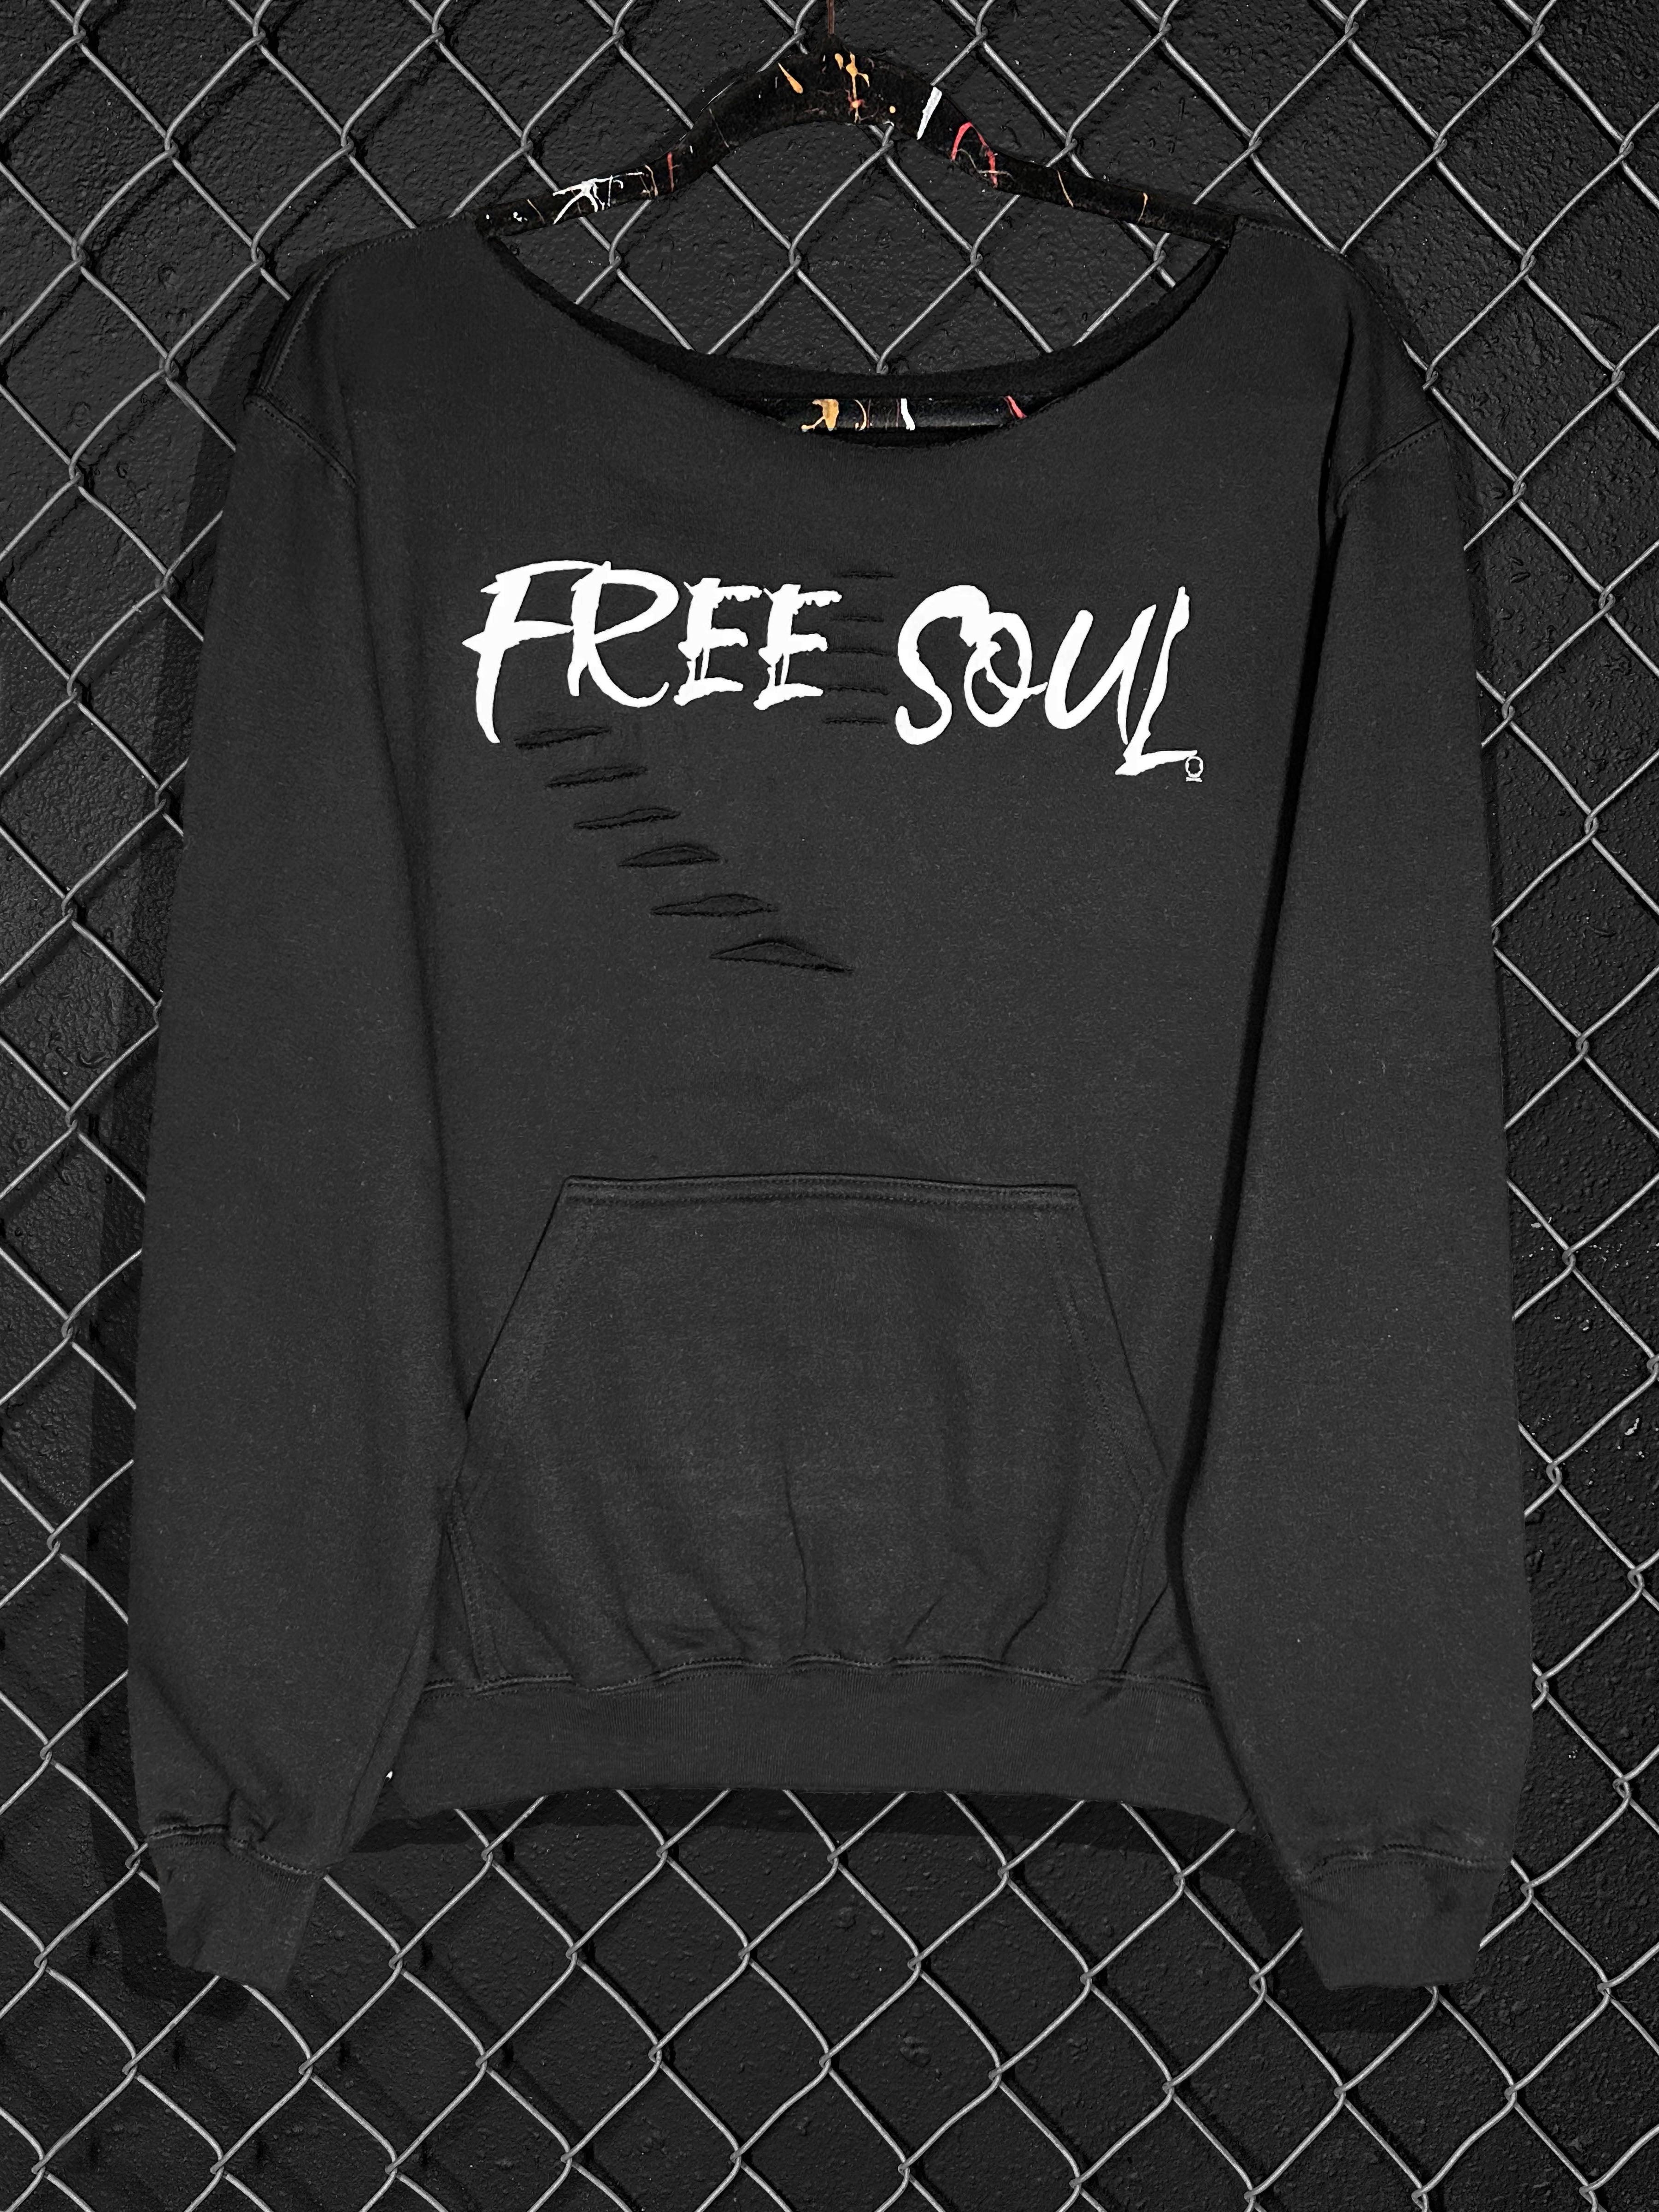 FREE SOUL WIDE NECK SWEATSHIRT - The Drive Clothing